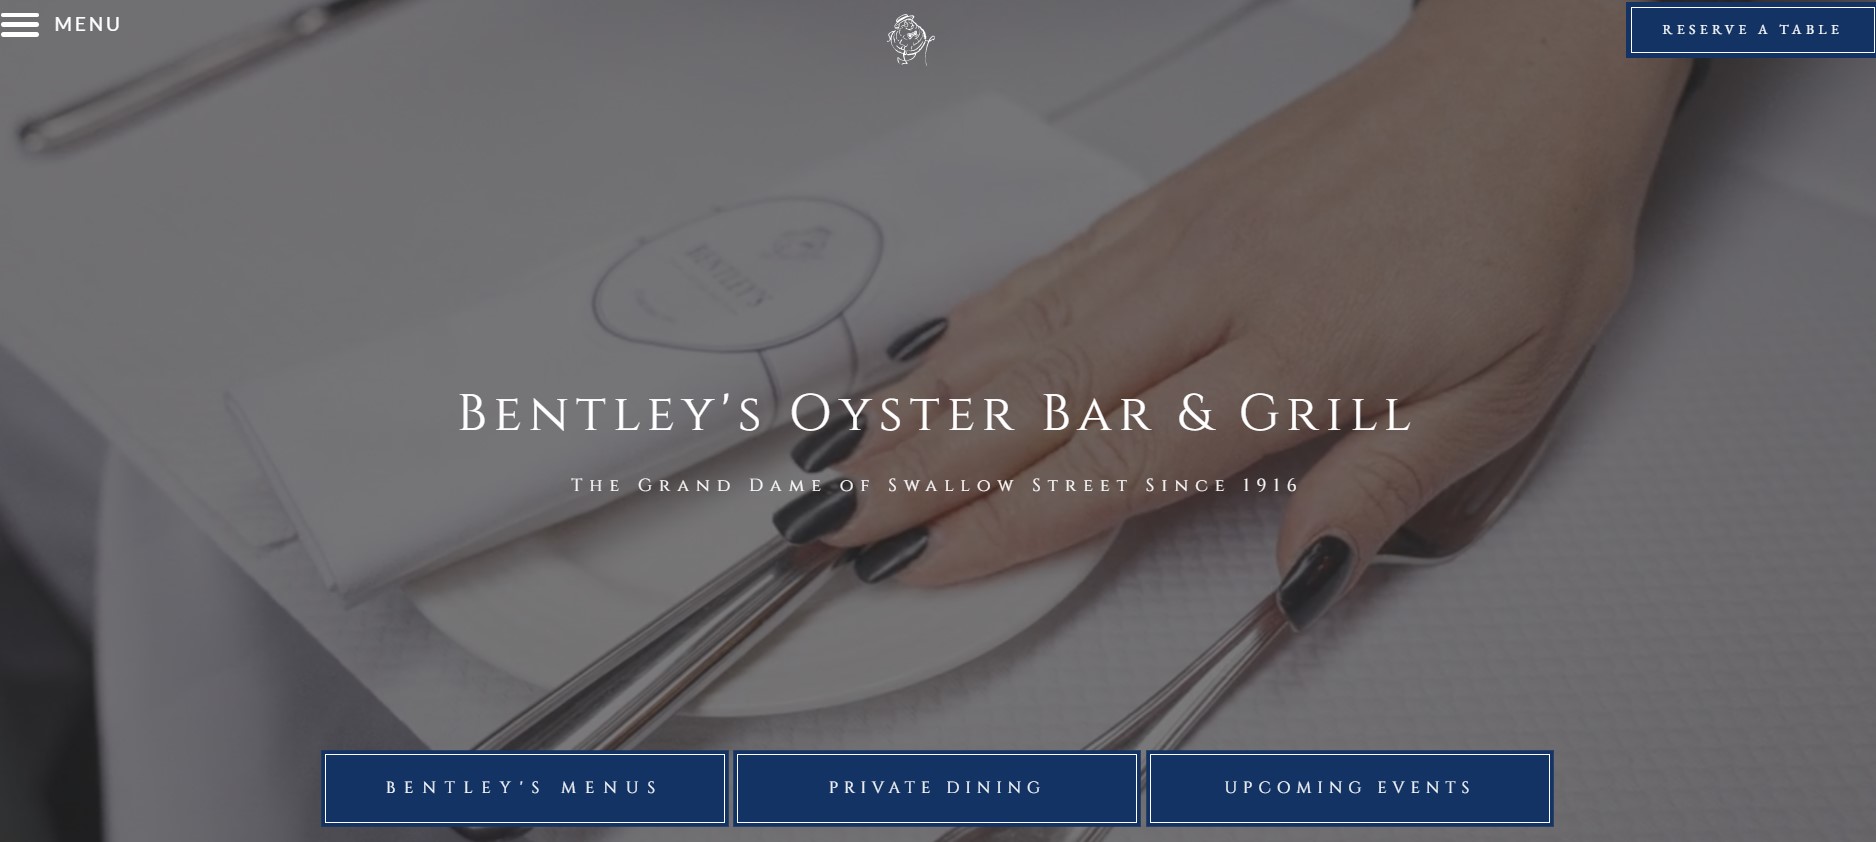 Bentley's Oyster Bar & Grill